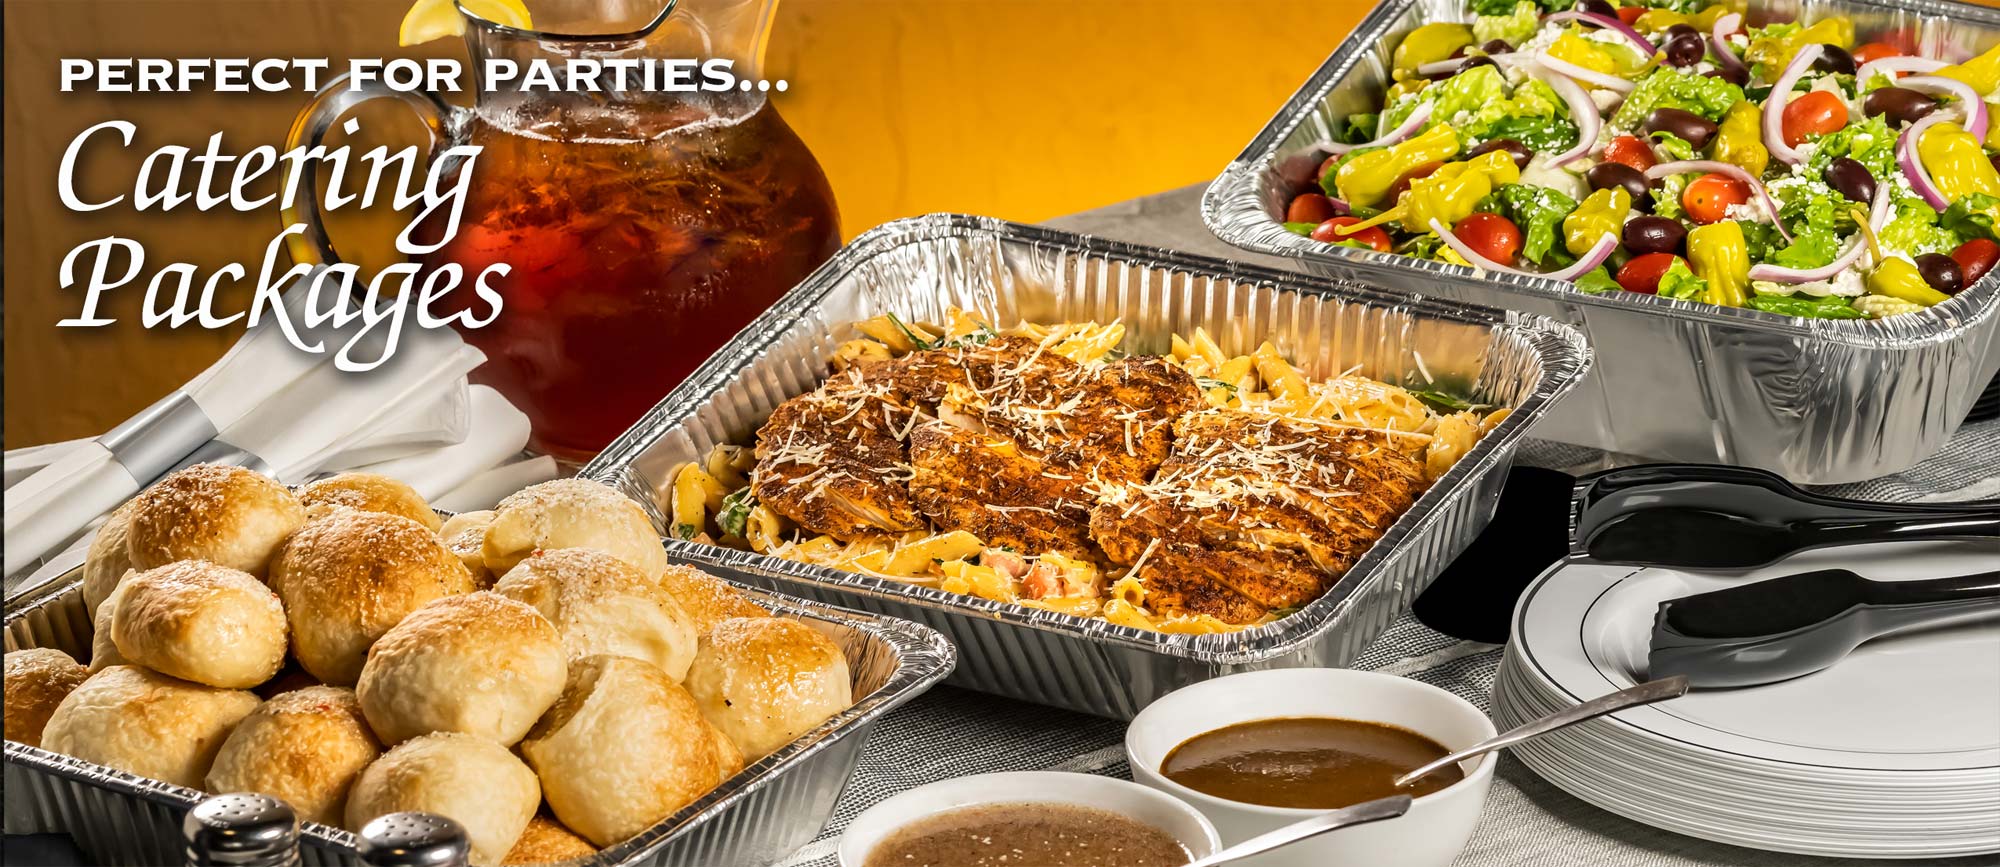 Piesanos also offers catering for all events.